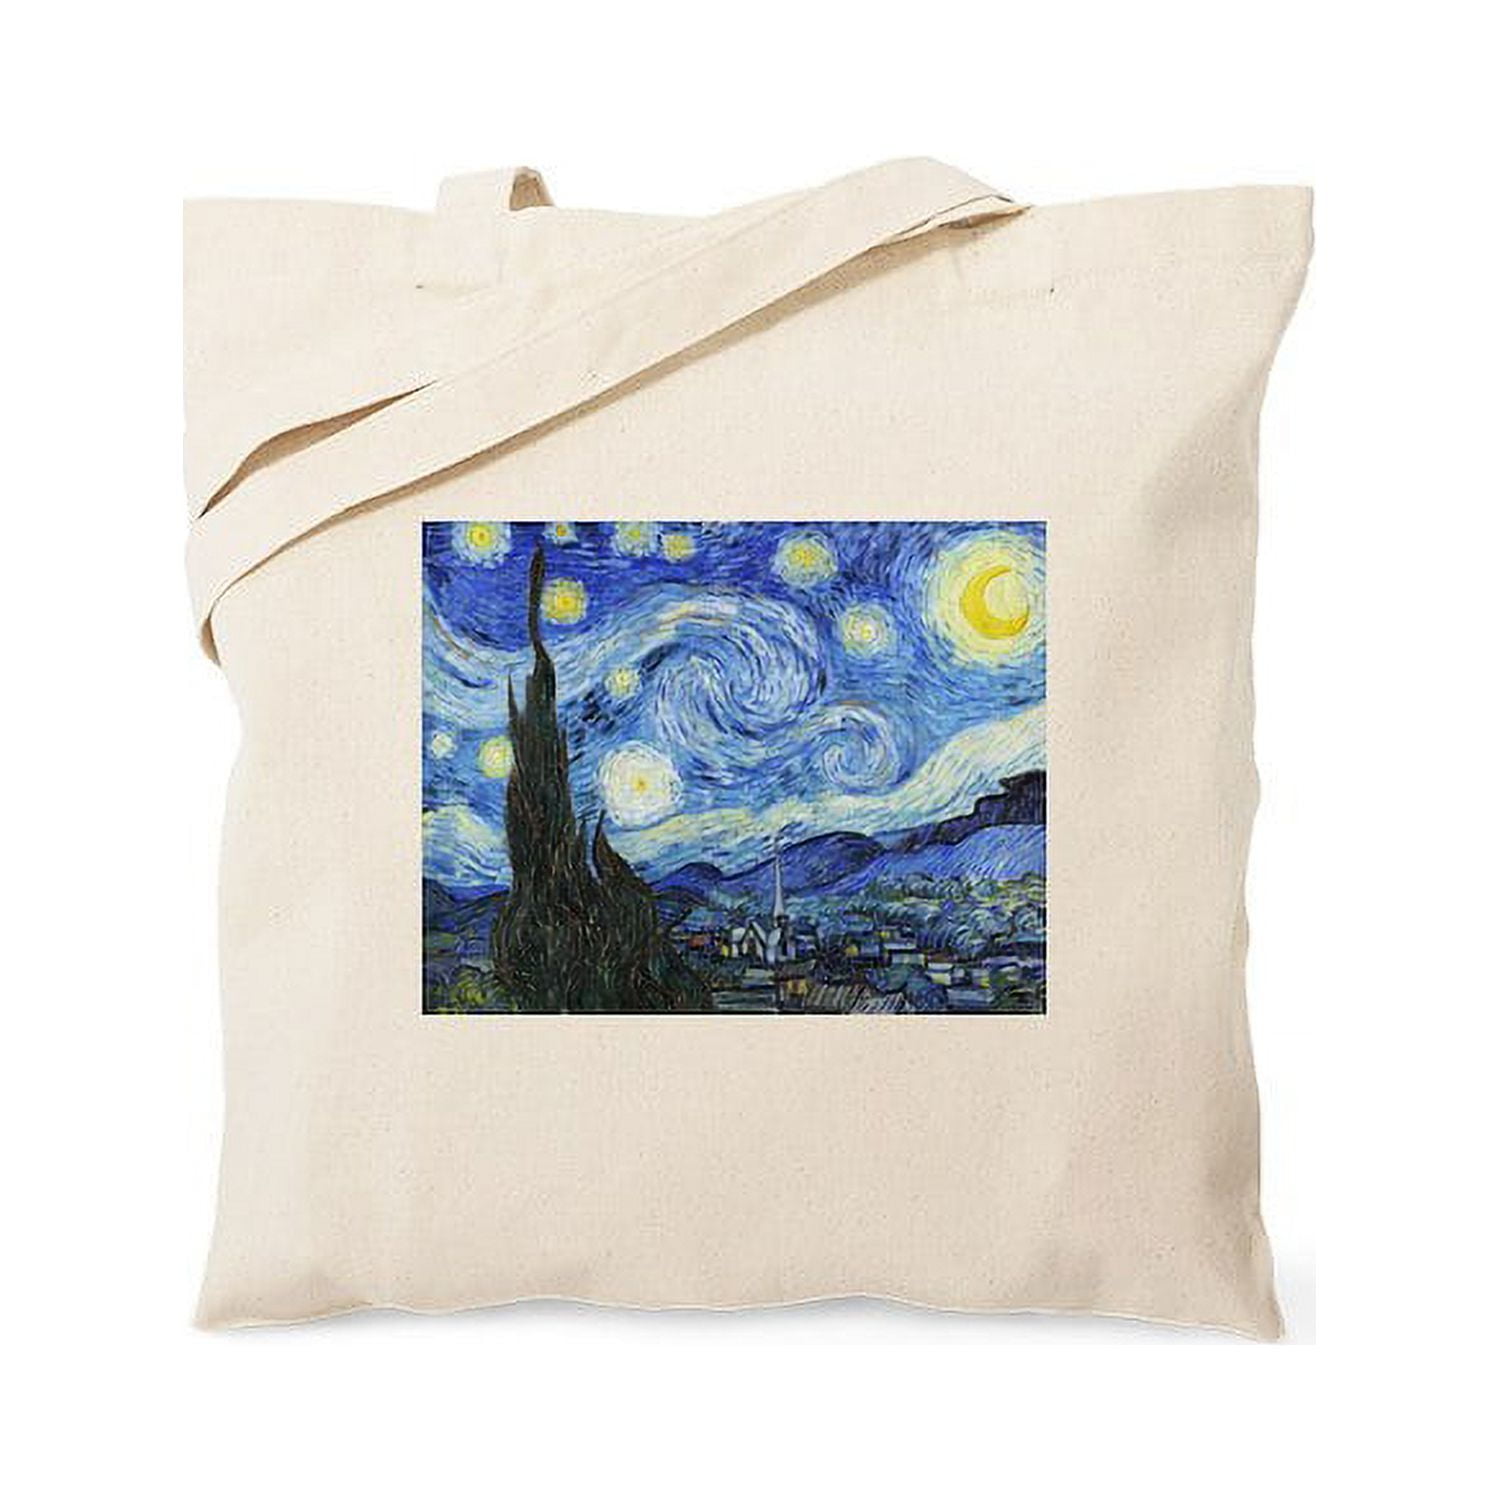 CafePress - The Starry Night By Vincent Van Gogh Tote Bag - Natural Canvas Tote  Bag, Cloth Shopping Bag 